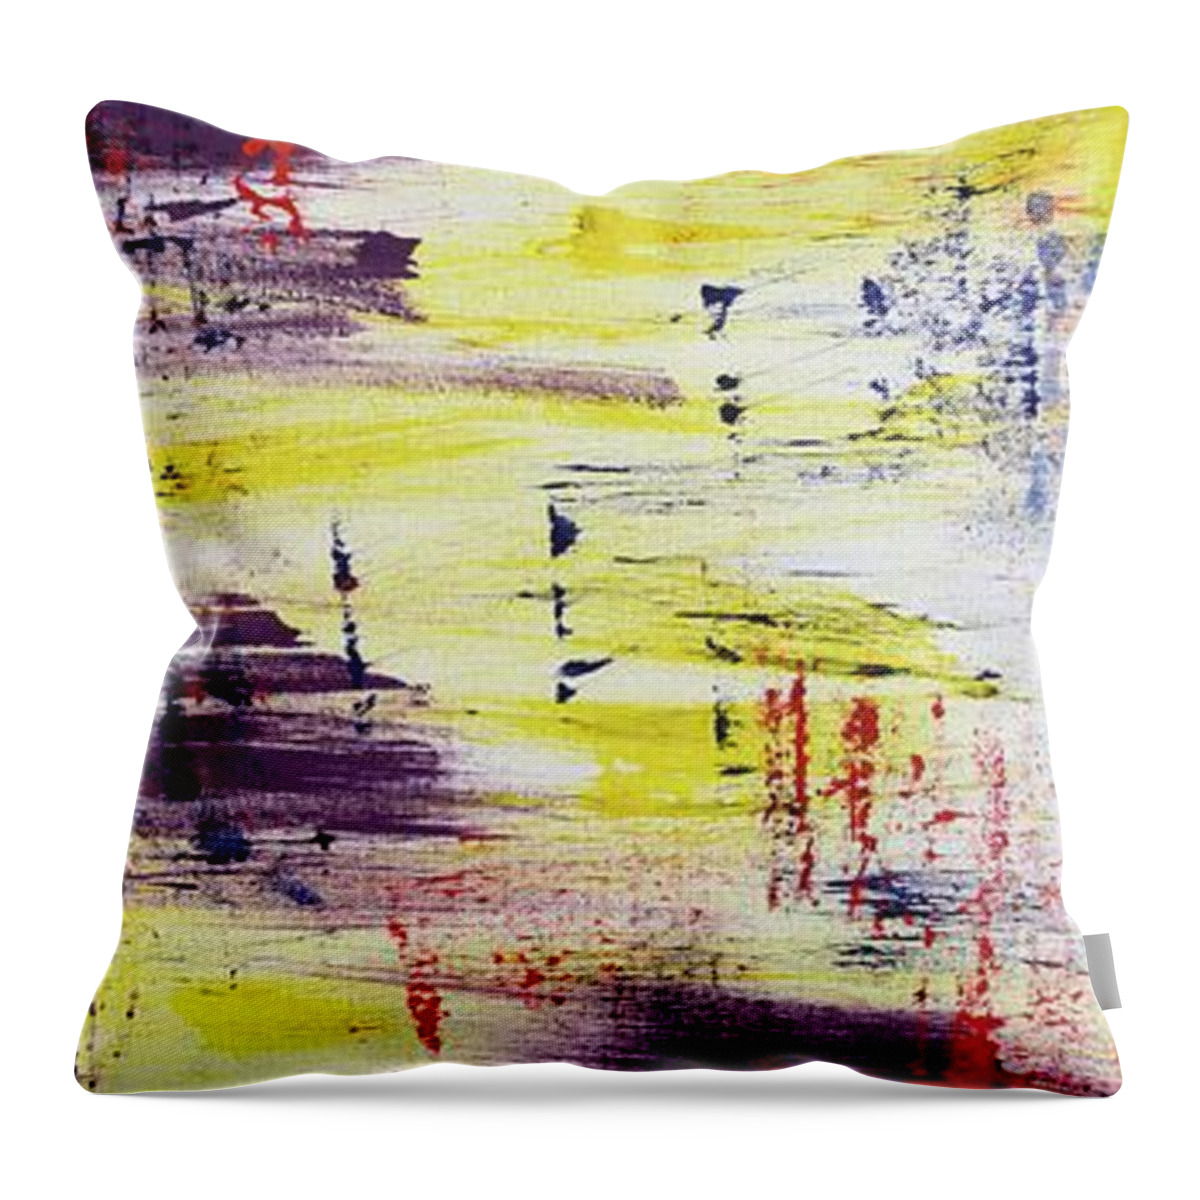 Abstract Throw Pillow featuring the painting Pathways by Angela Bushman